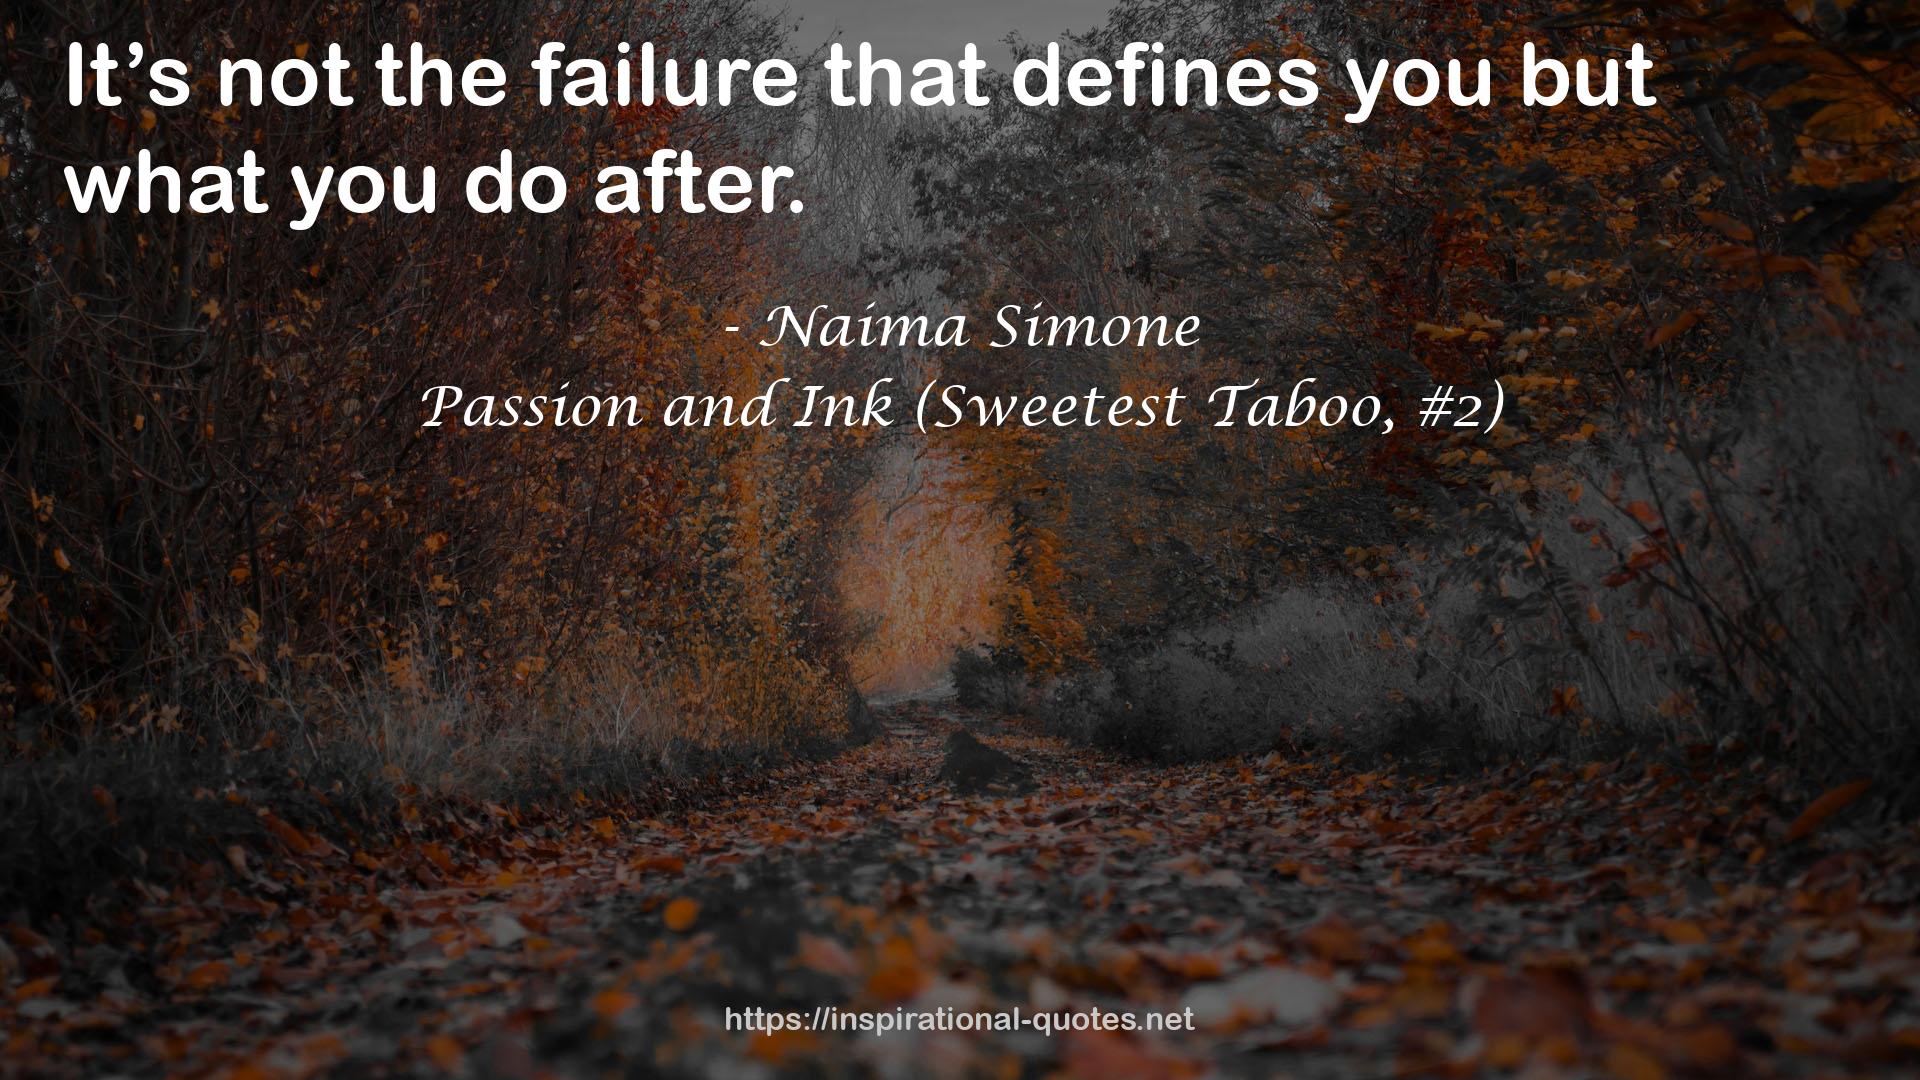 Passion and Ink (Sweetest Taboo, #2) QUOTES